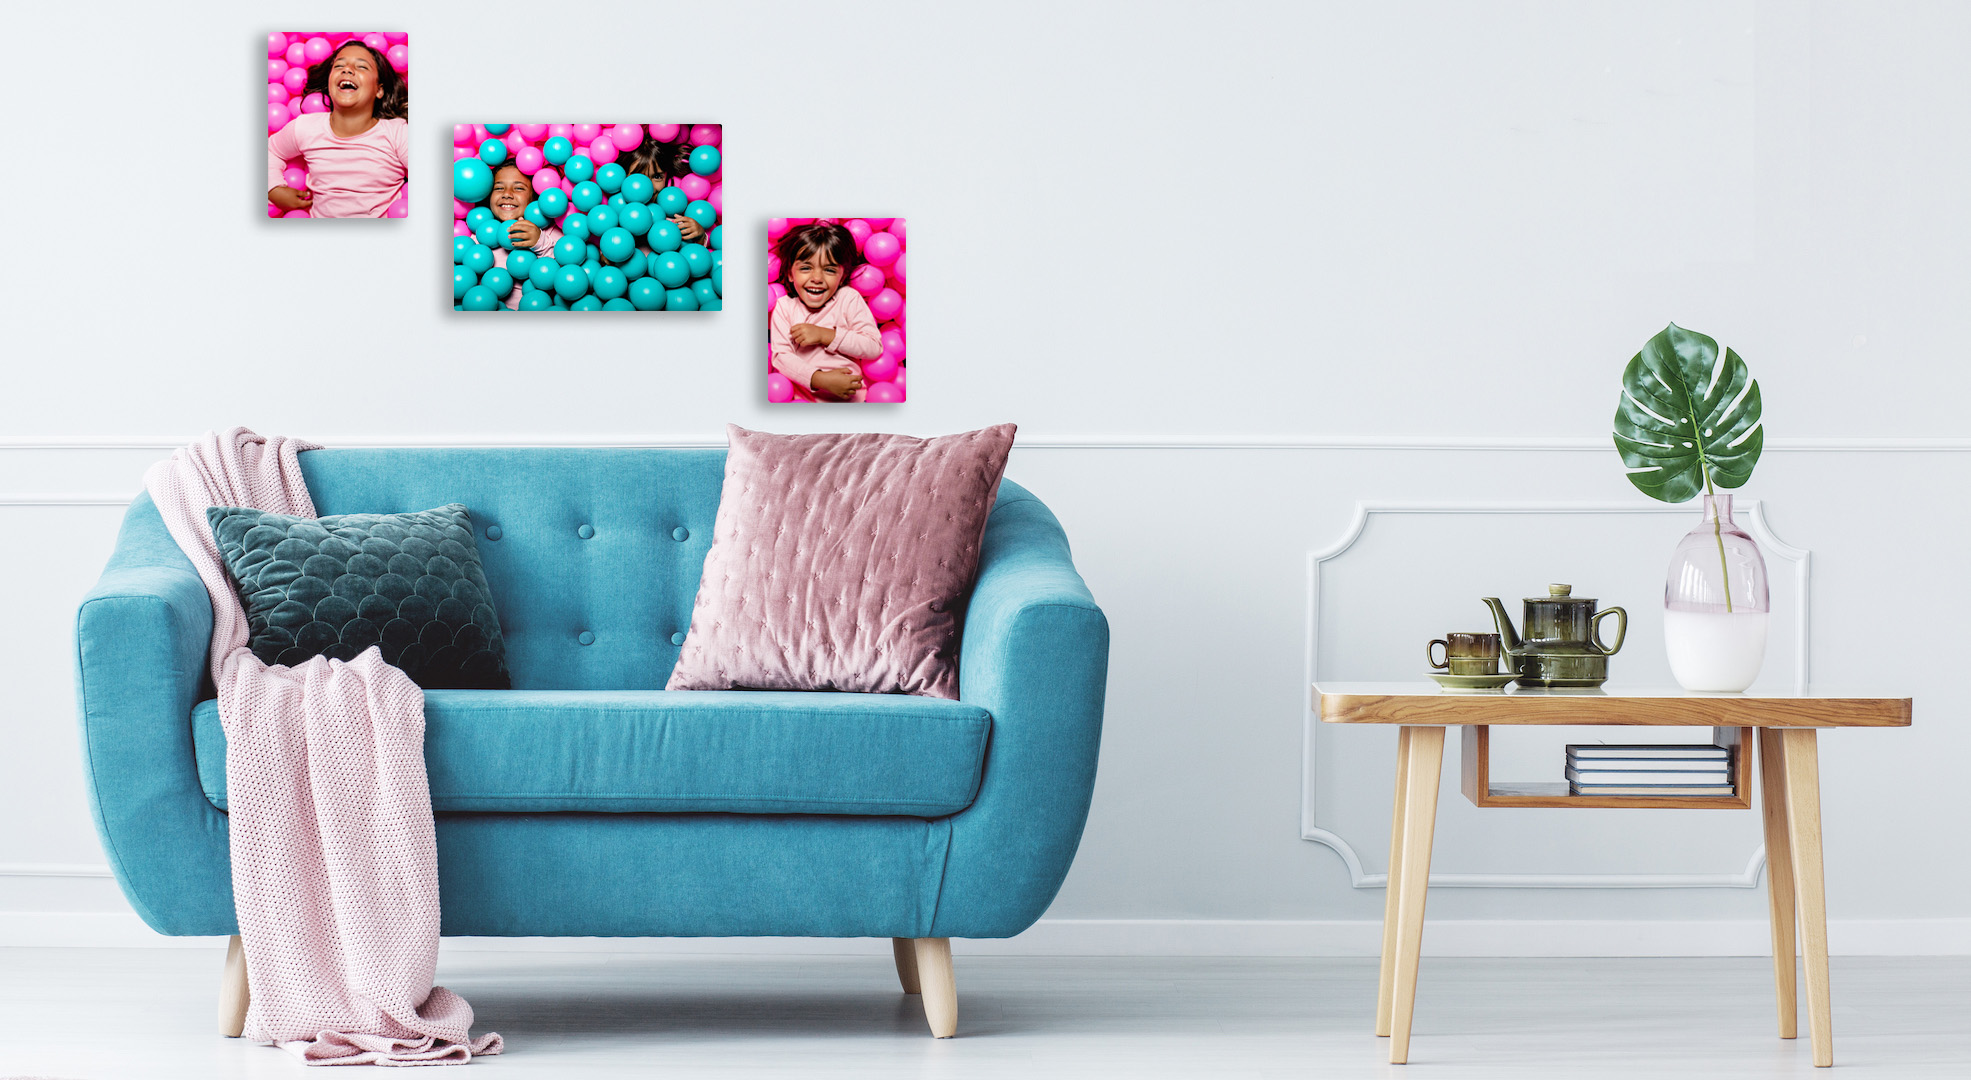 Wall Art: How to curate the perfect gallery wall for your home